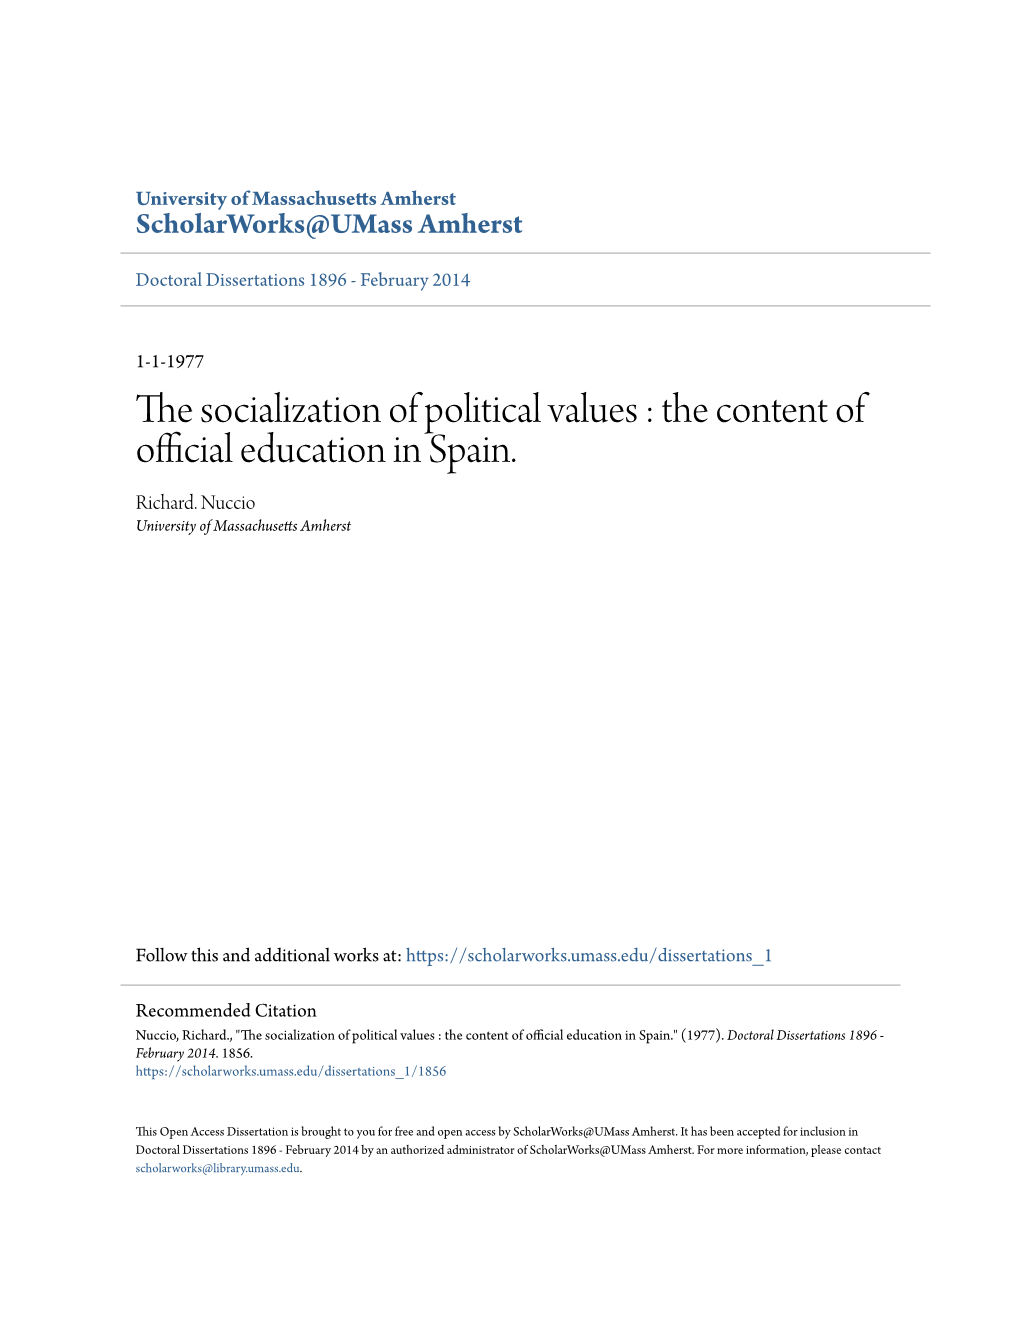 The Socialization of Political Values : the Content of Official Education in Spain